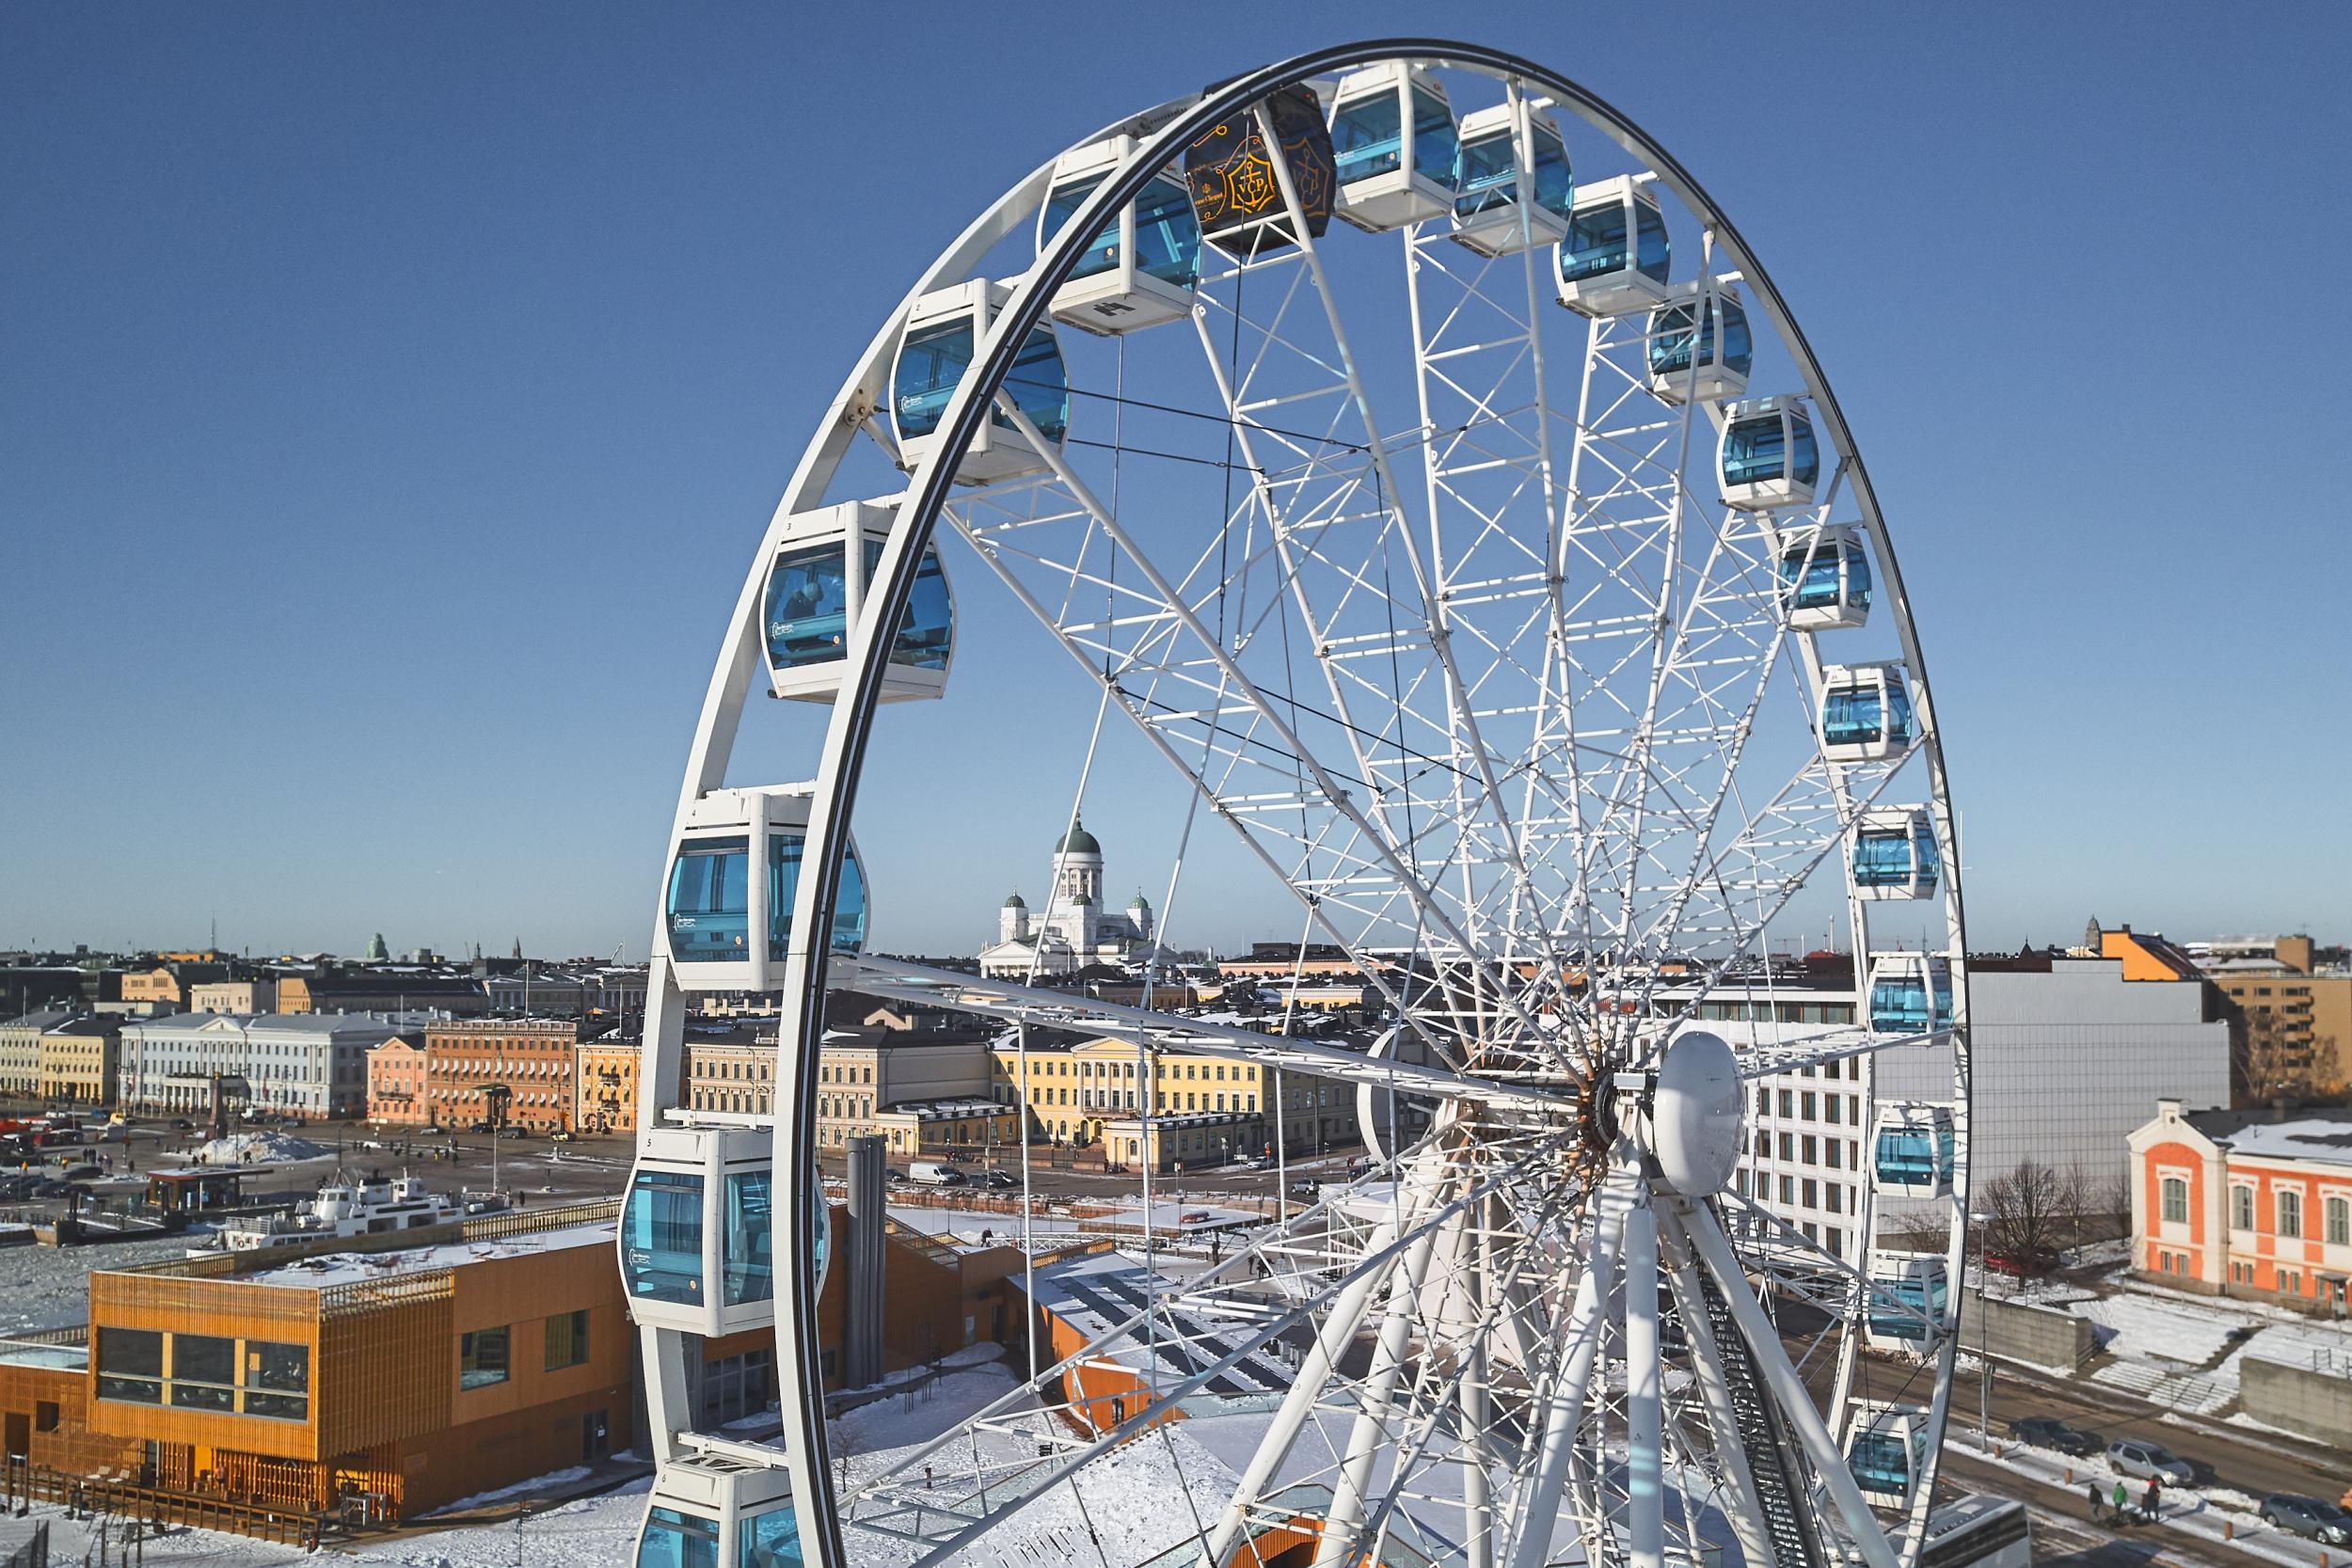 Why is there a random brown pod on the SkyWheel? It’s a sauna, obviously